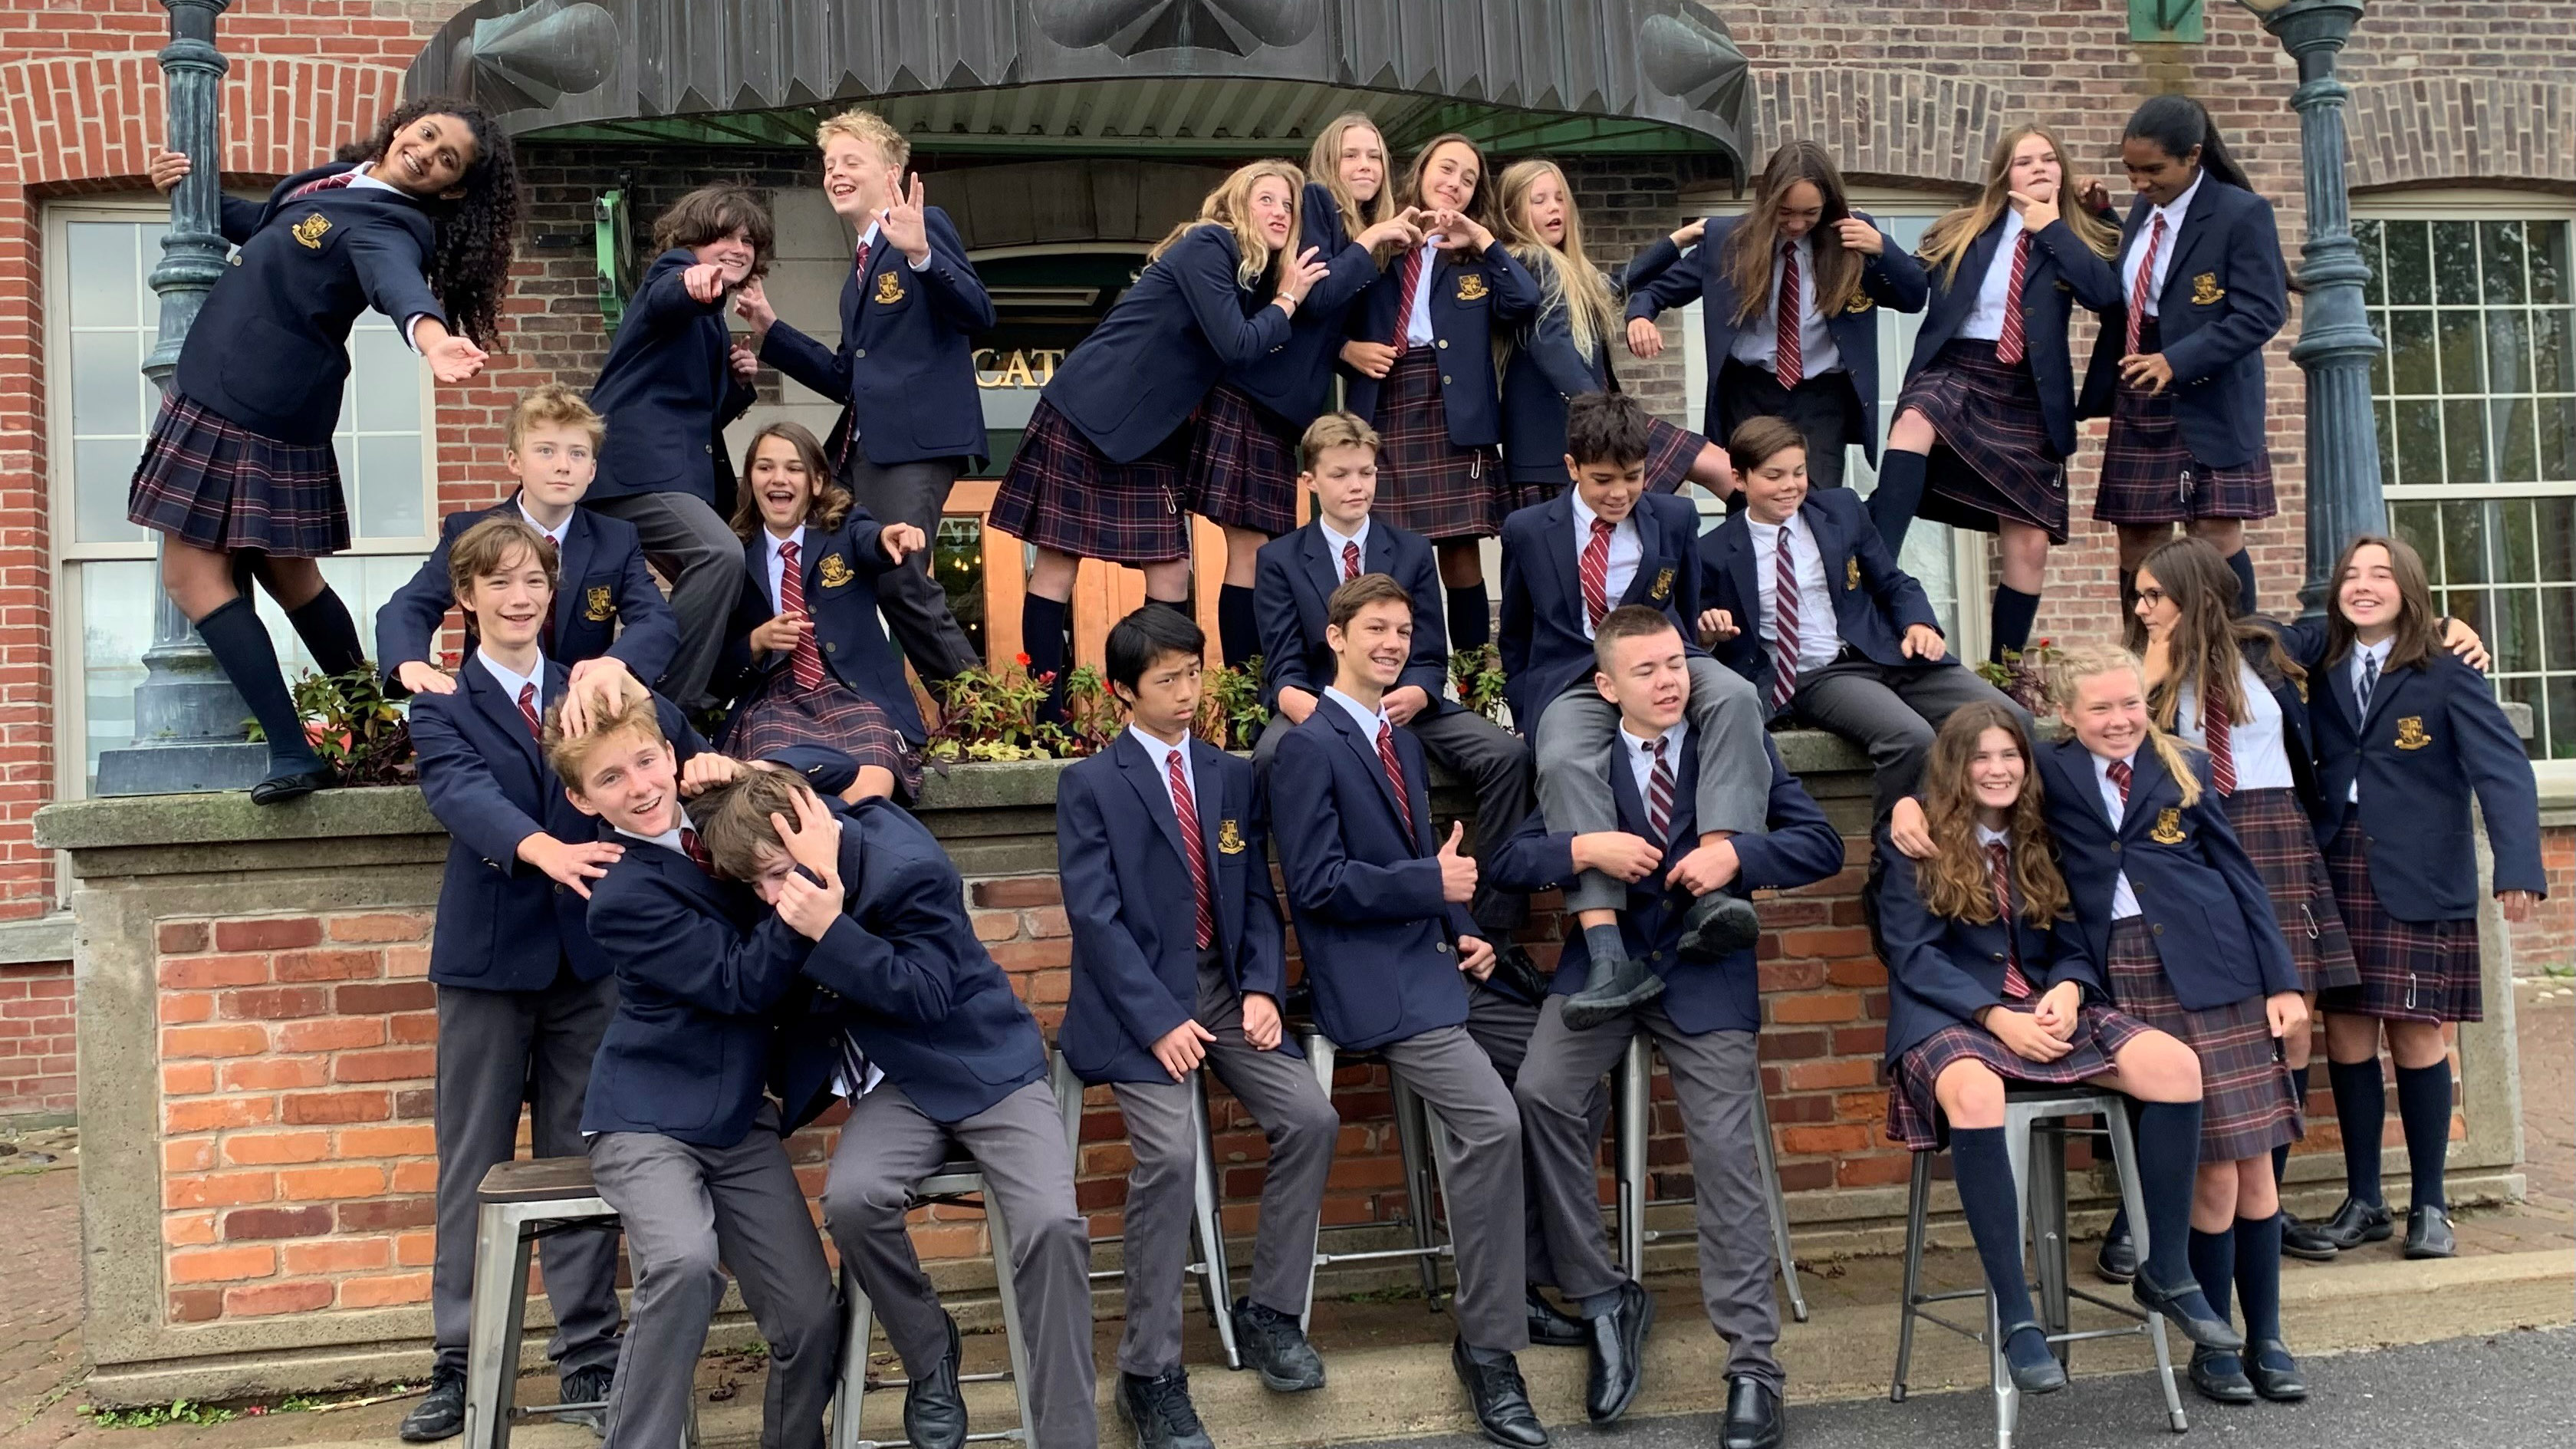 Silly class photo